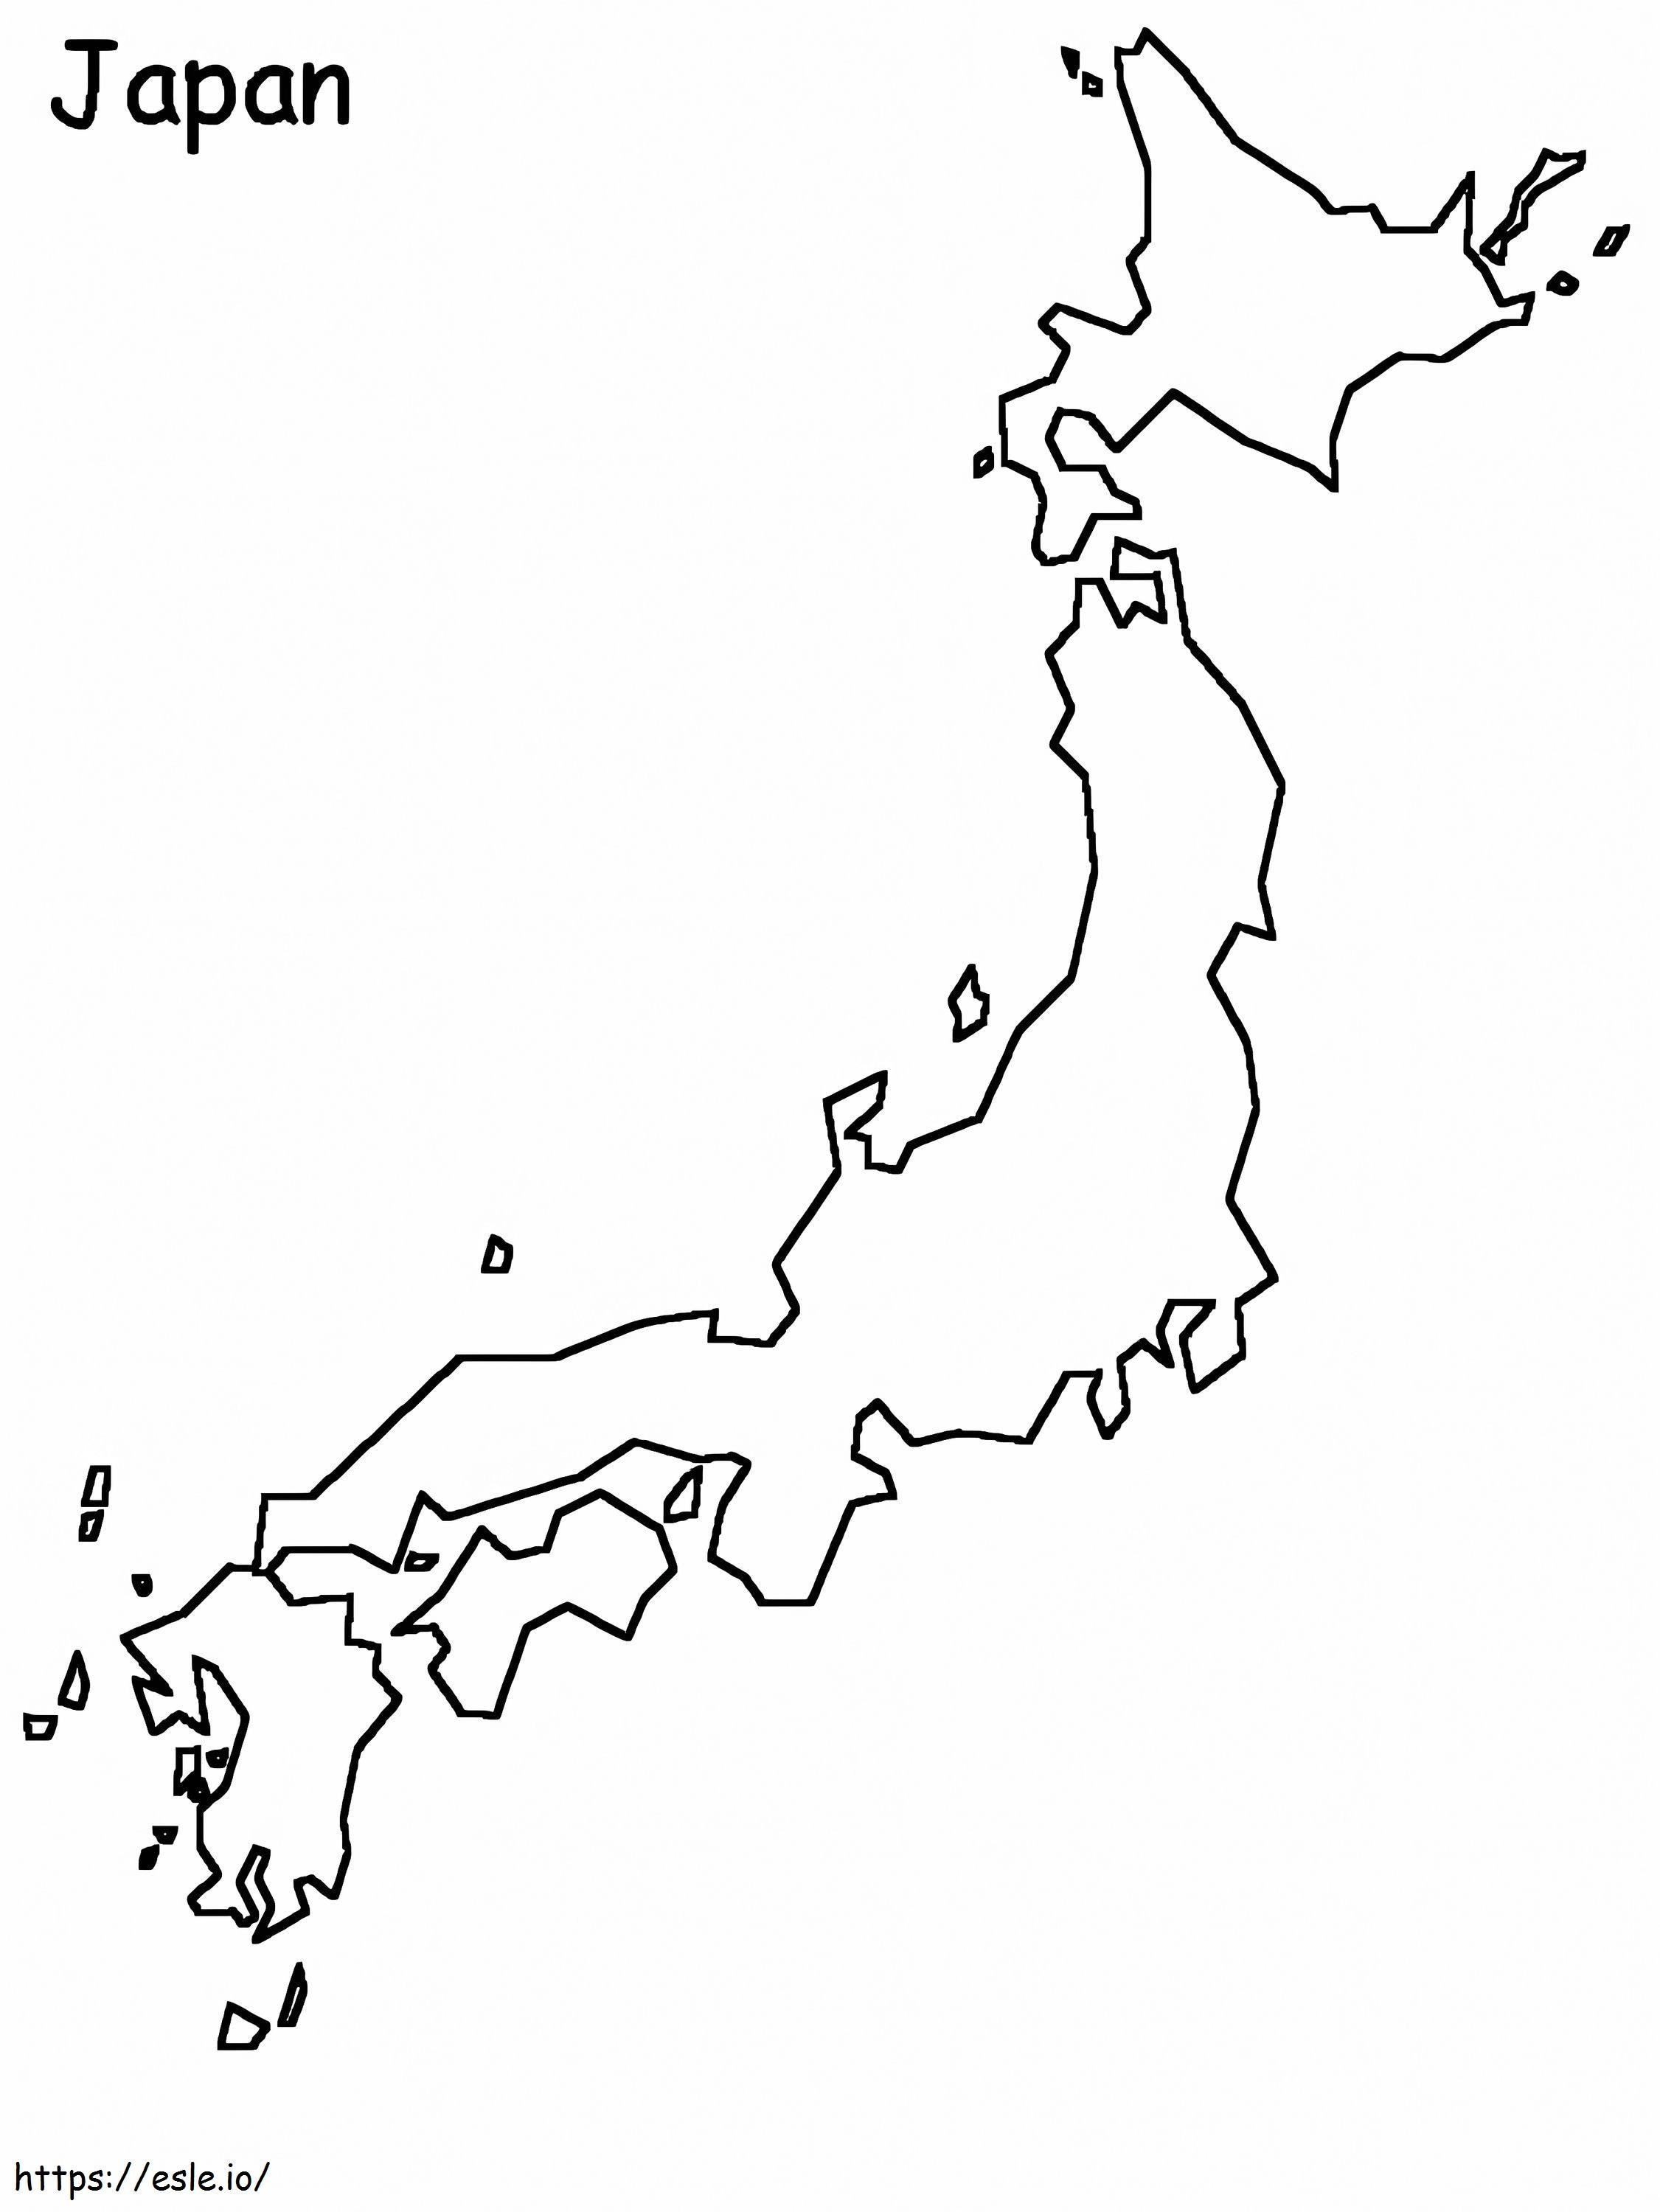 Japan Map Coloring Page coloring page